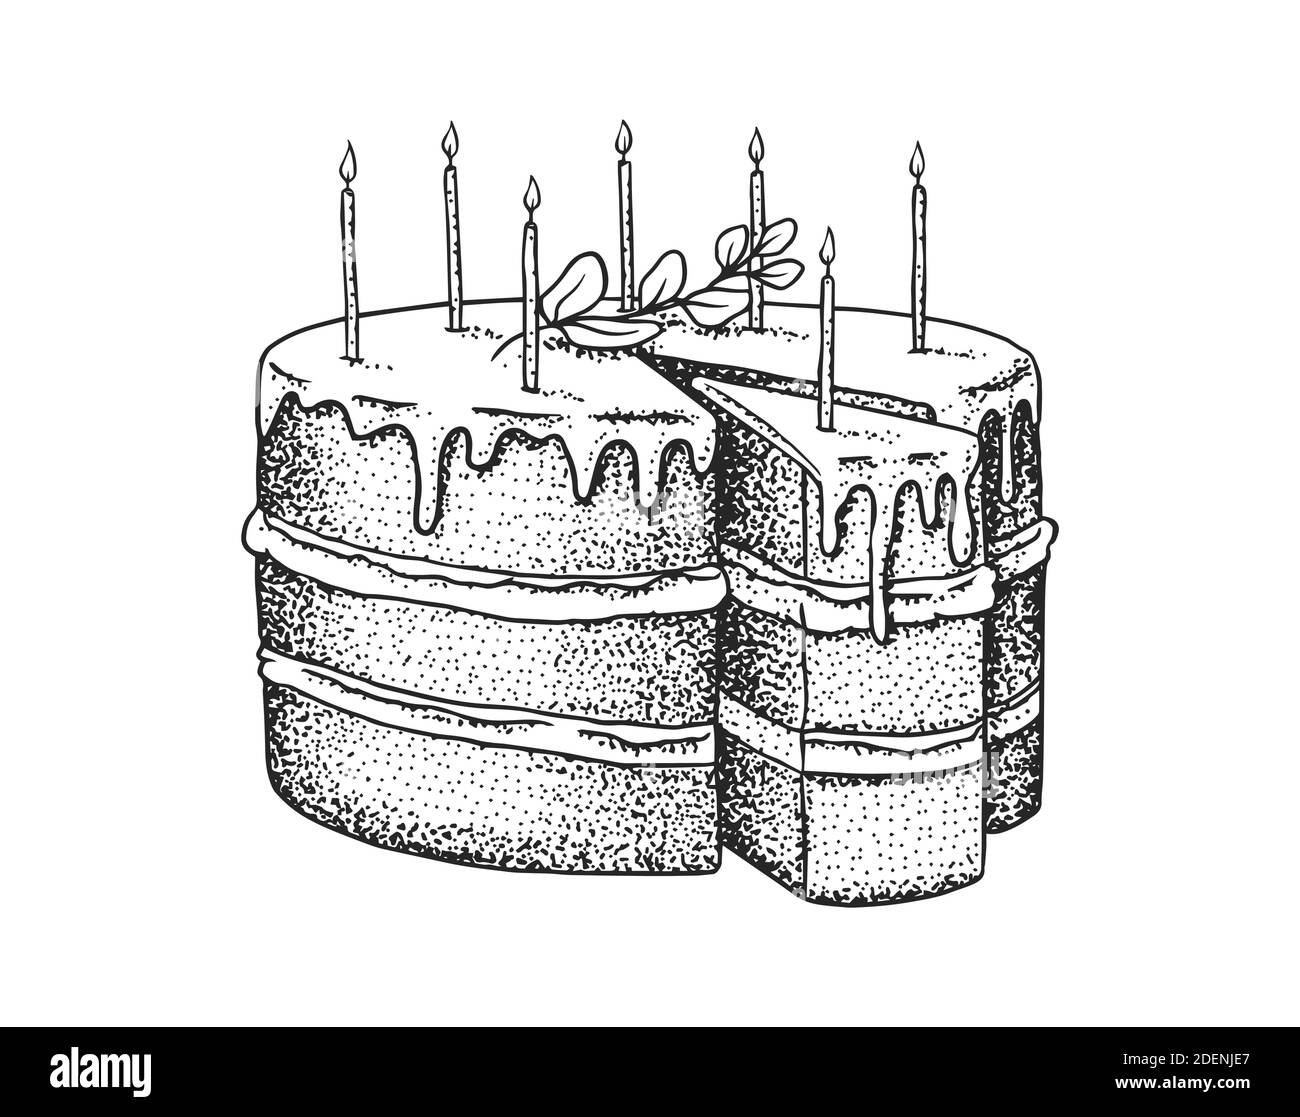 Birthday cake with candles. Fruit dessert or tart. Hand drawn bakery product. Celebratory Sweet Food. Vintage engraved sketch. Vector illustration for Stock Vector